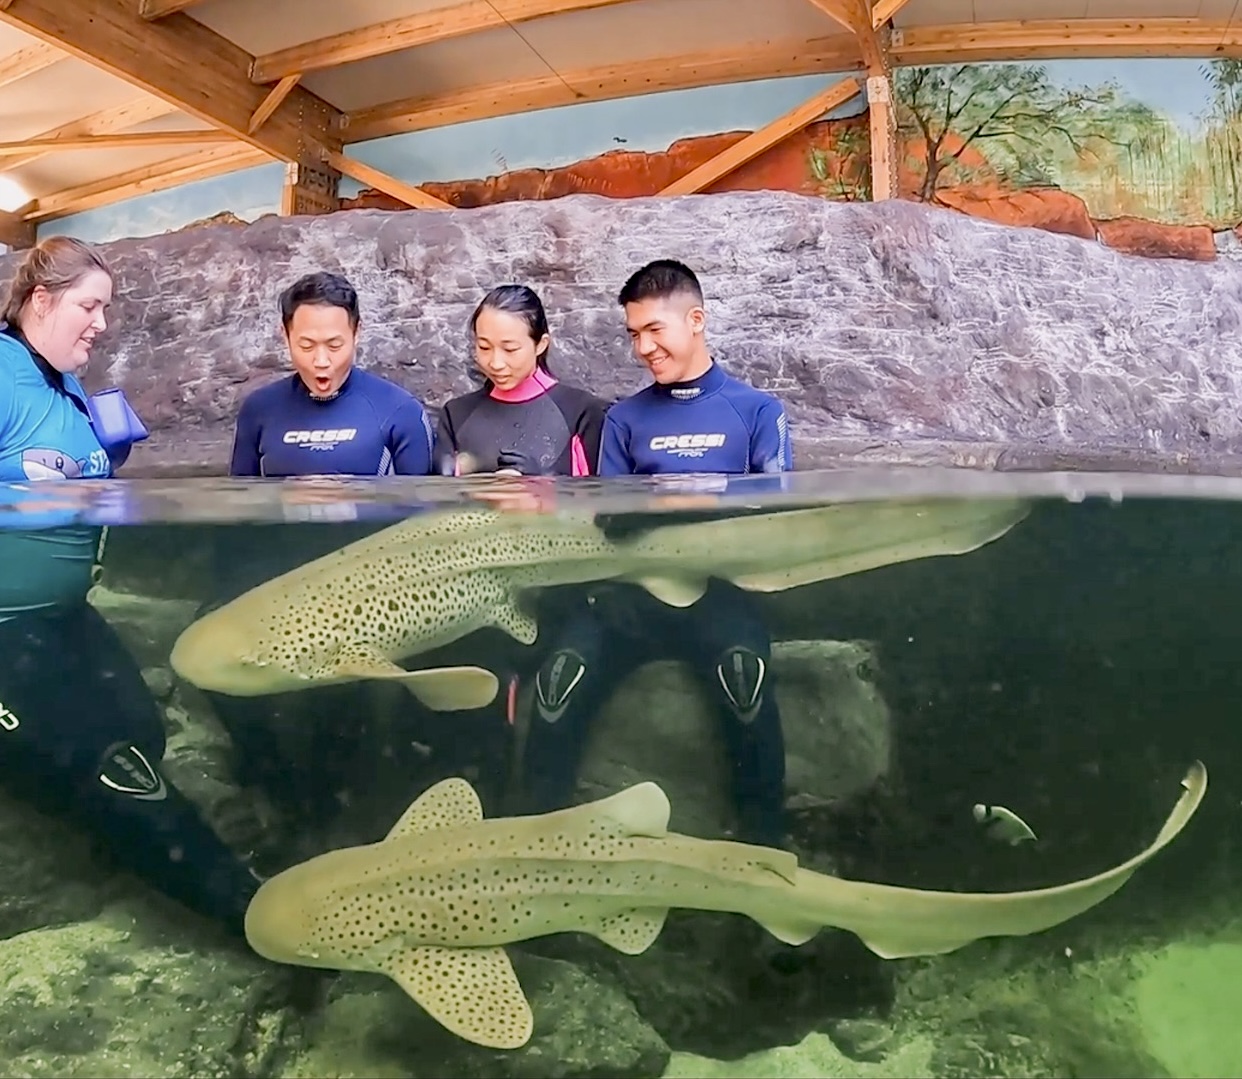 Zebra Shark Encounter $60 B2B packaged with Entry Pass (all ages)  B2B Booking